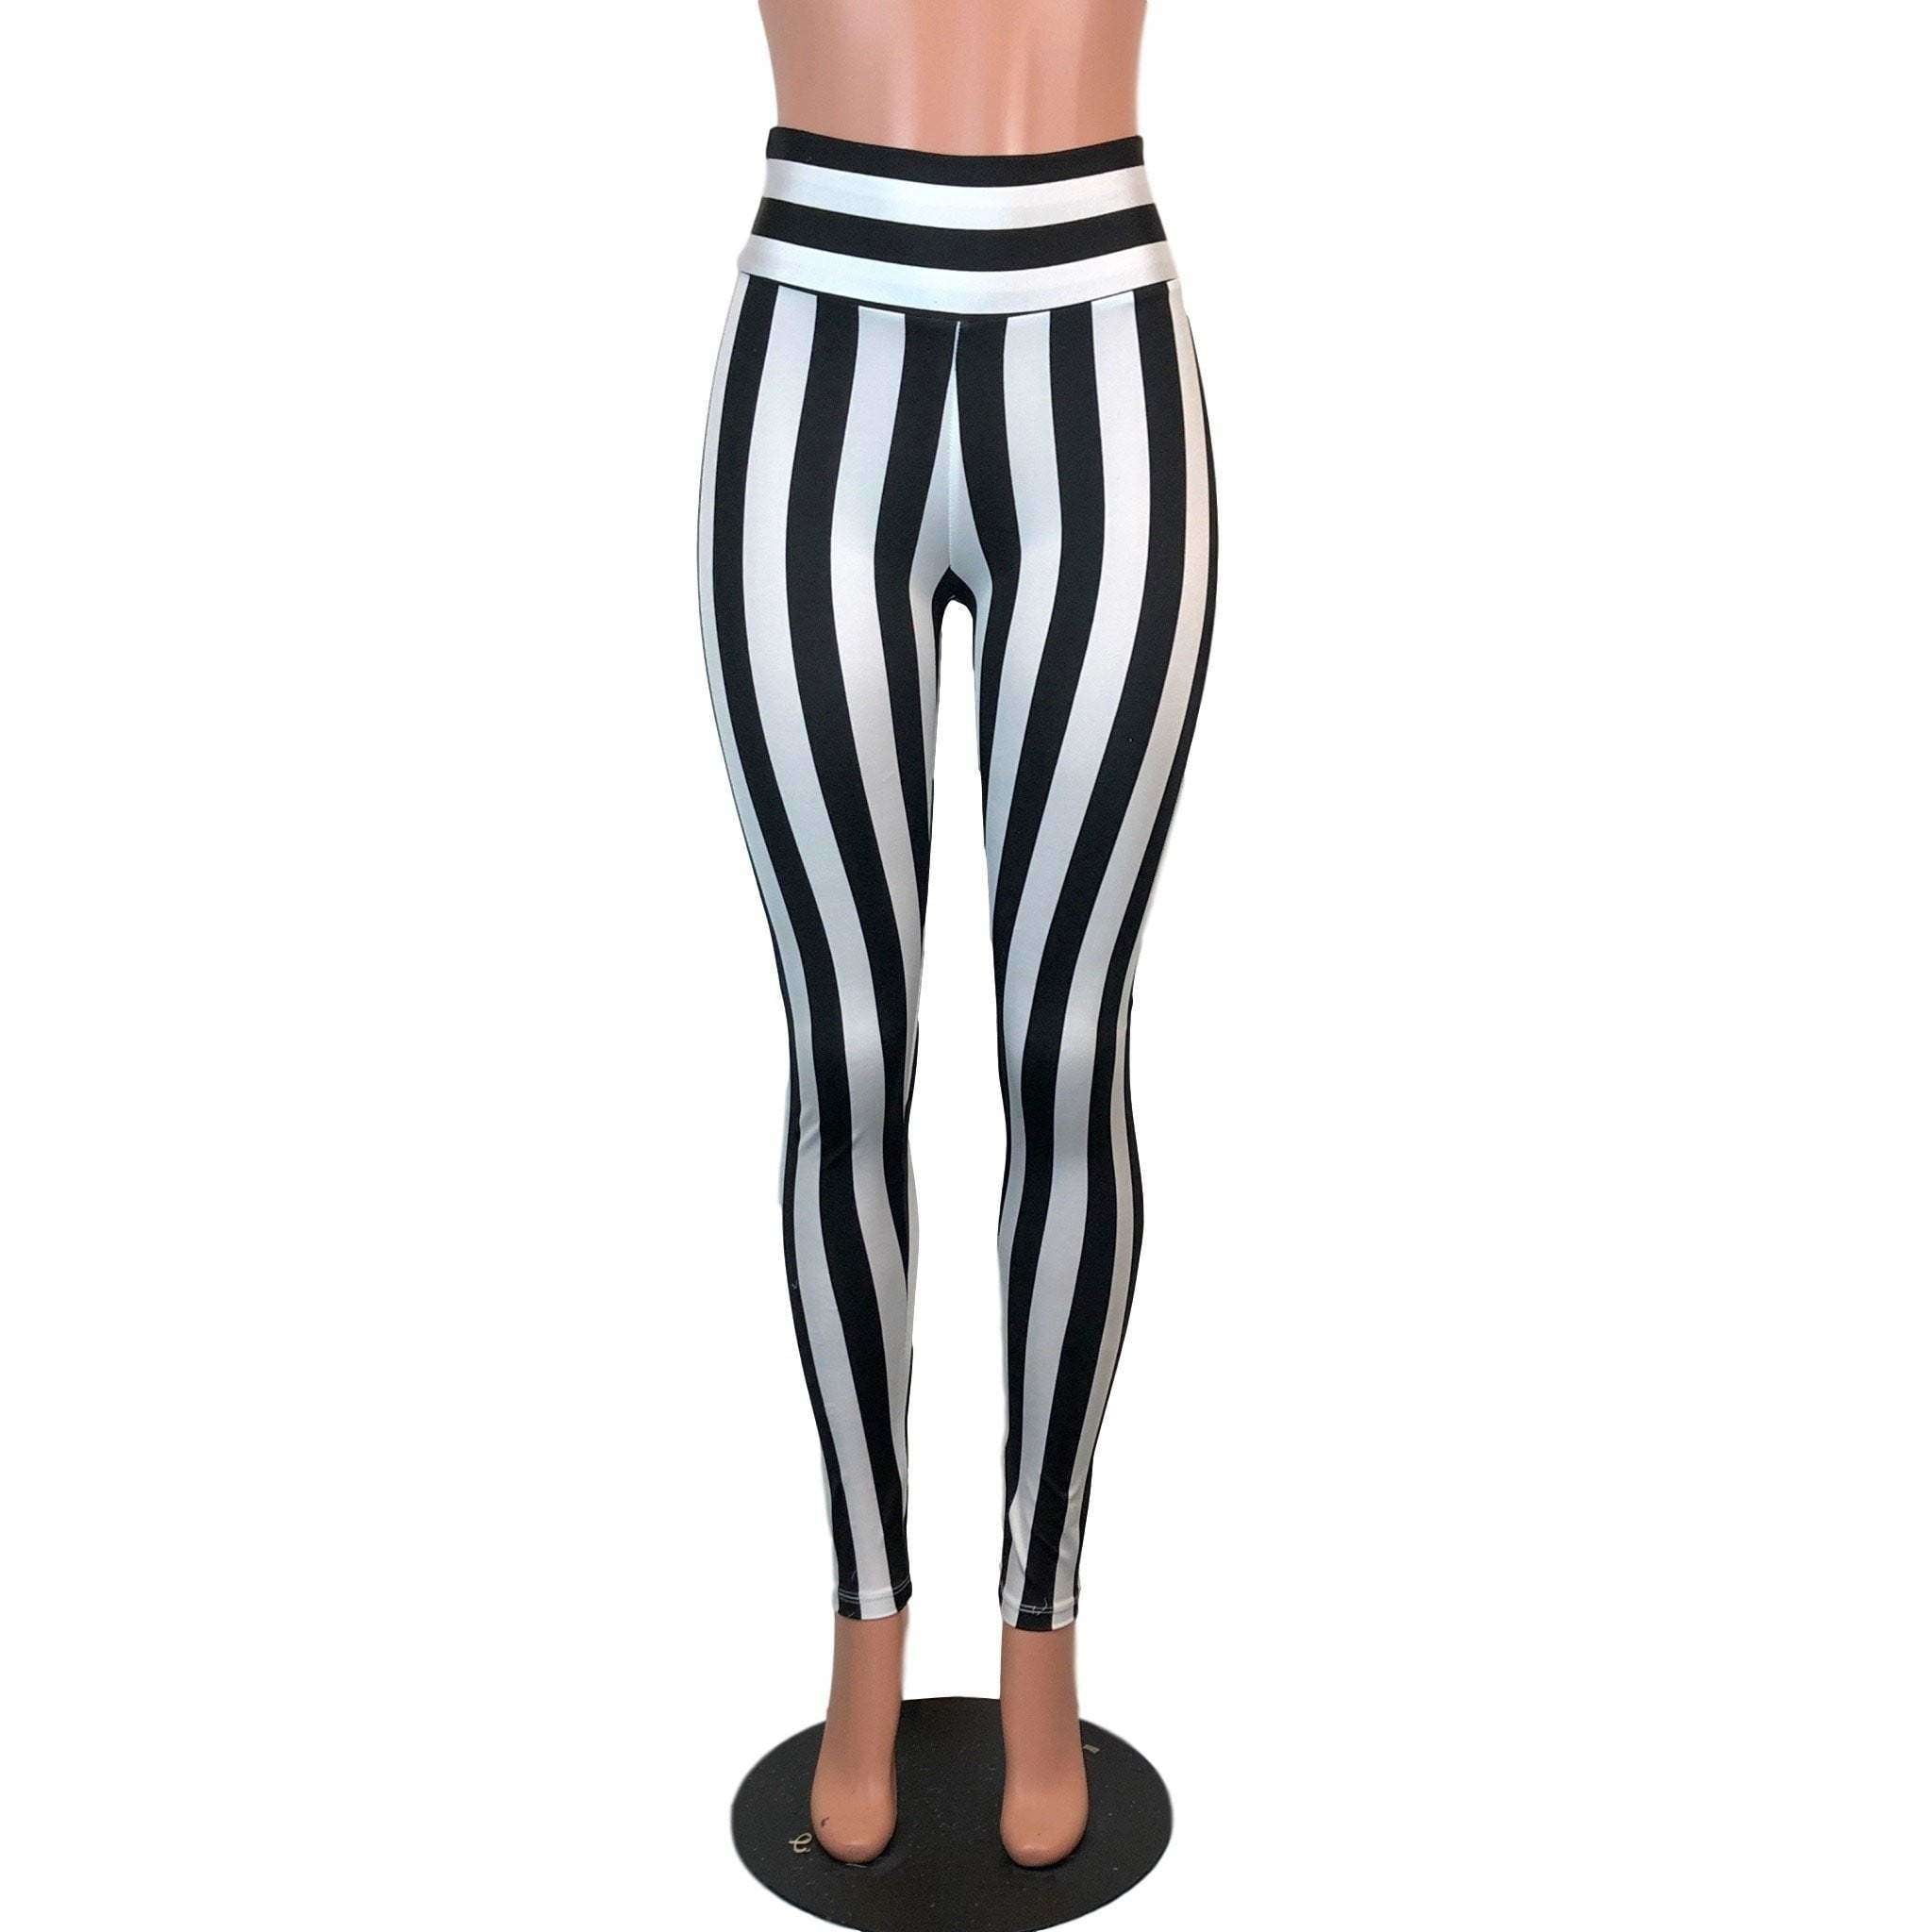 black and white striped high waisted pants